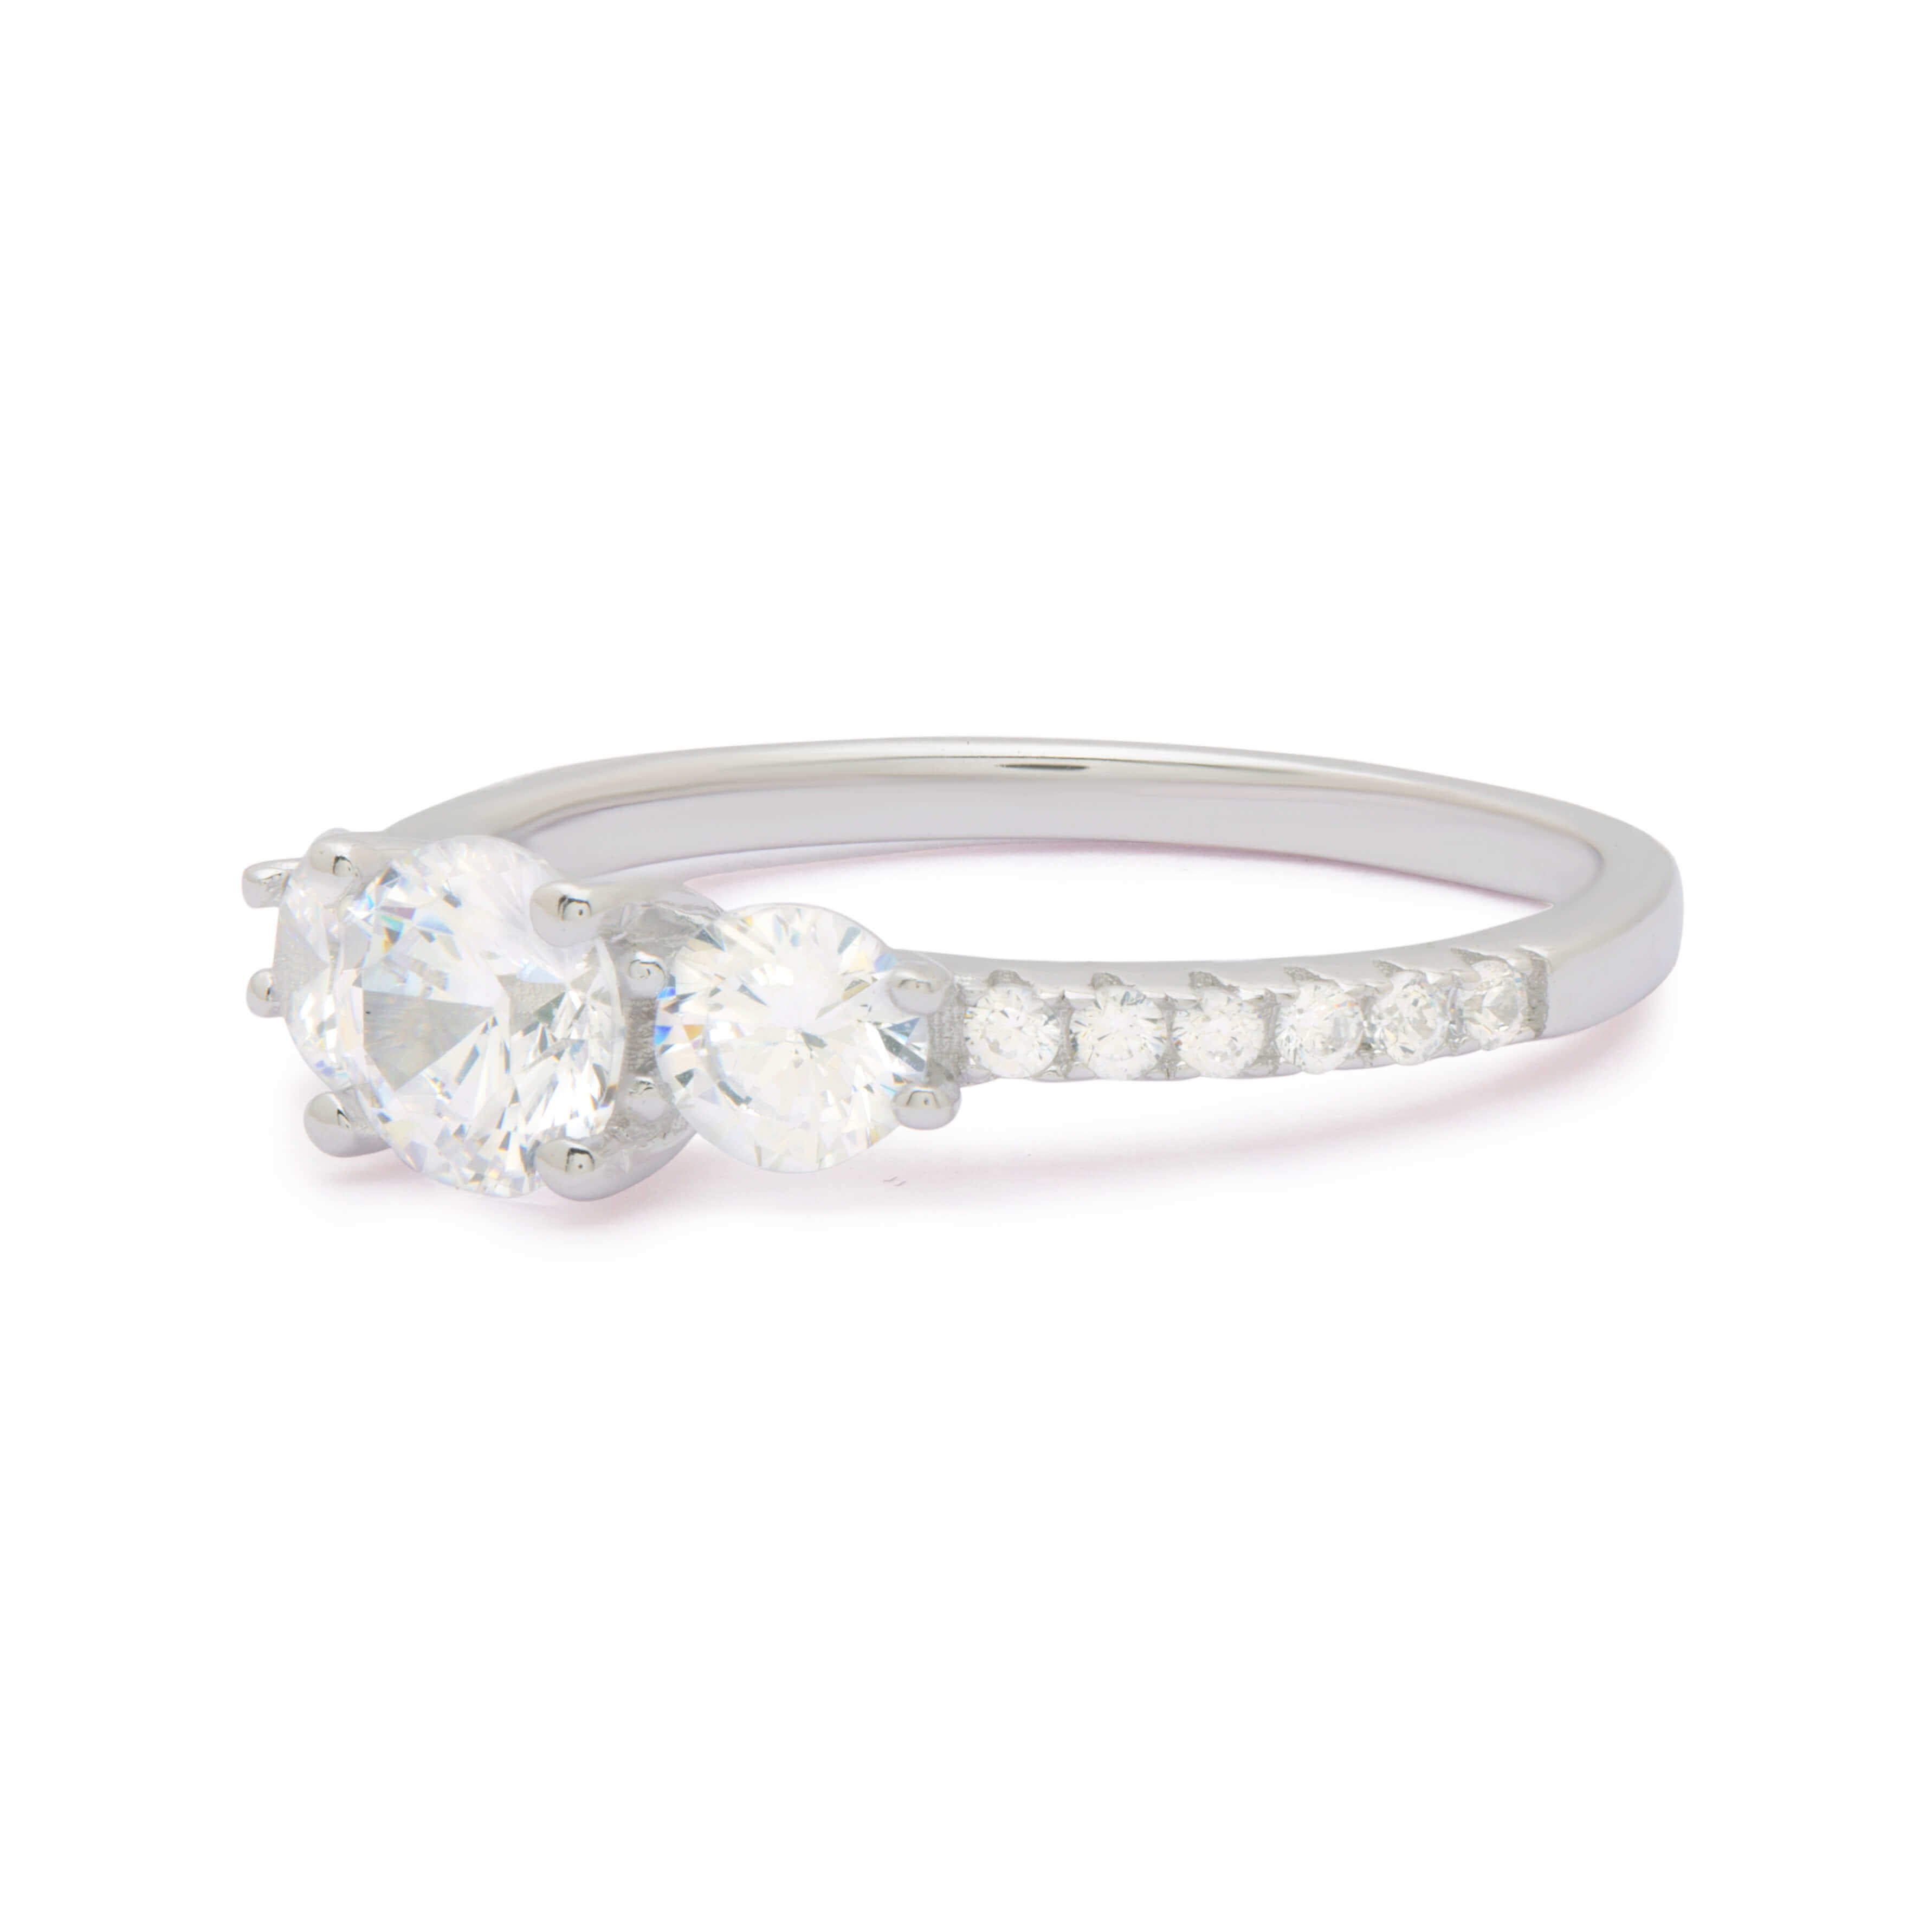 Flawless Diamond Ring In Sterling Silver